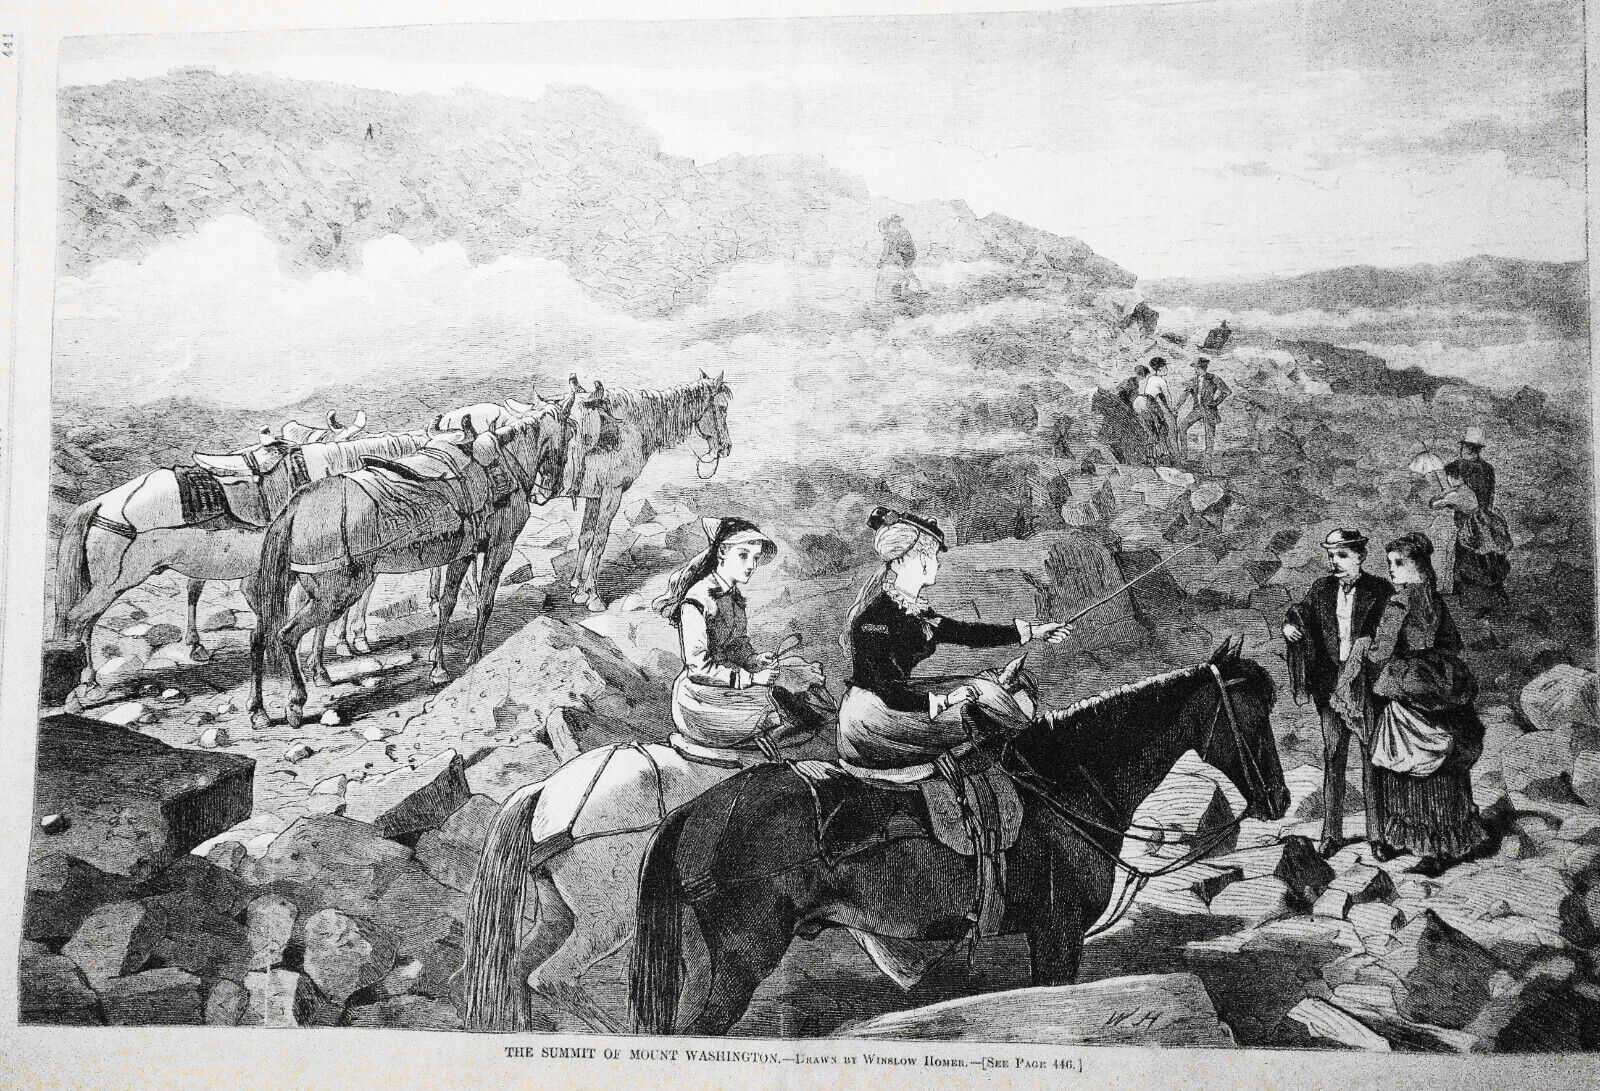 The Summit of Mount Washington by Winslow Homer in Harper\'s Weekly July 10, 1869